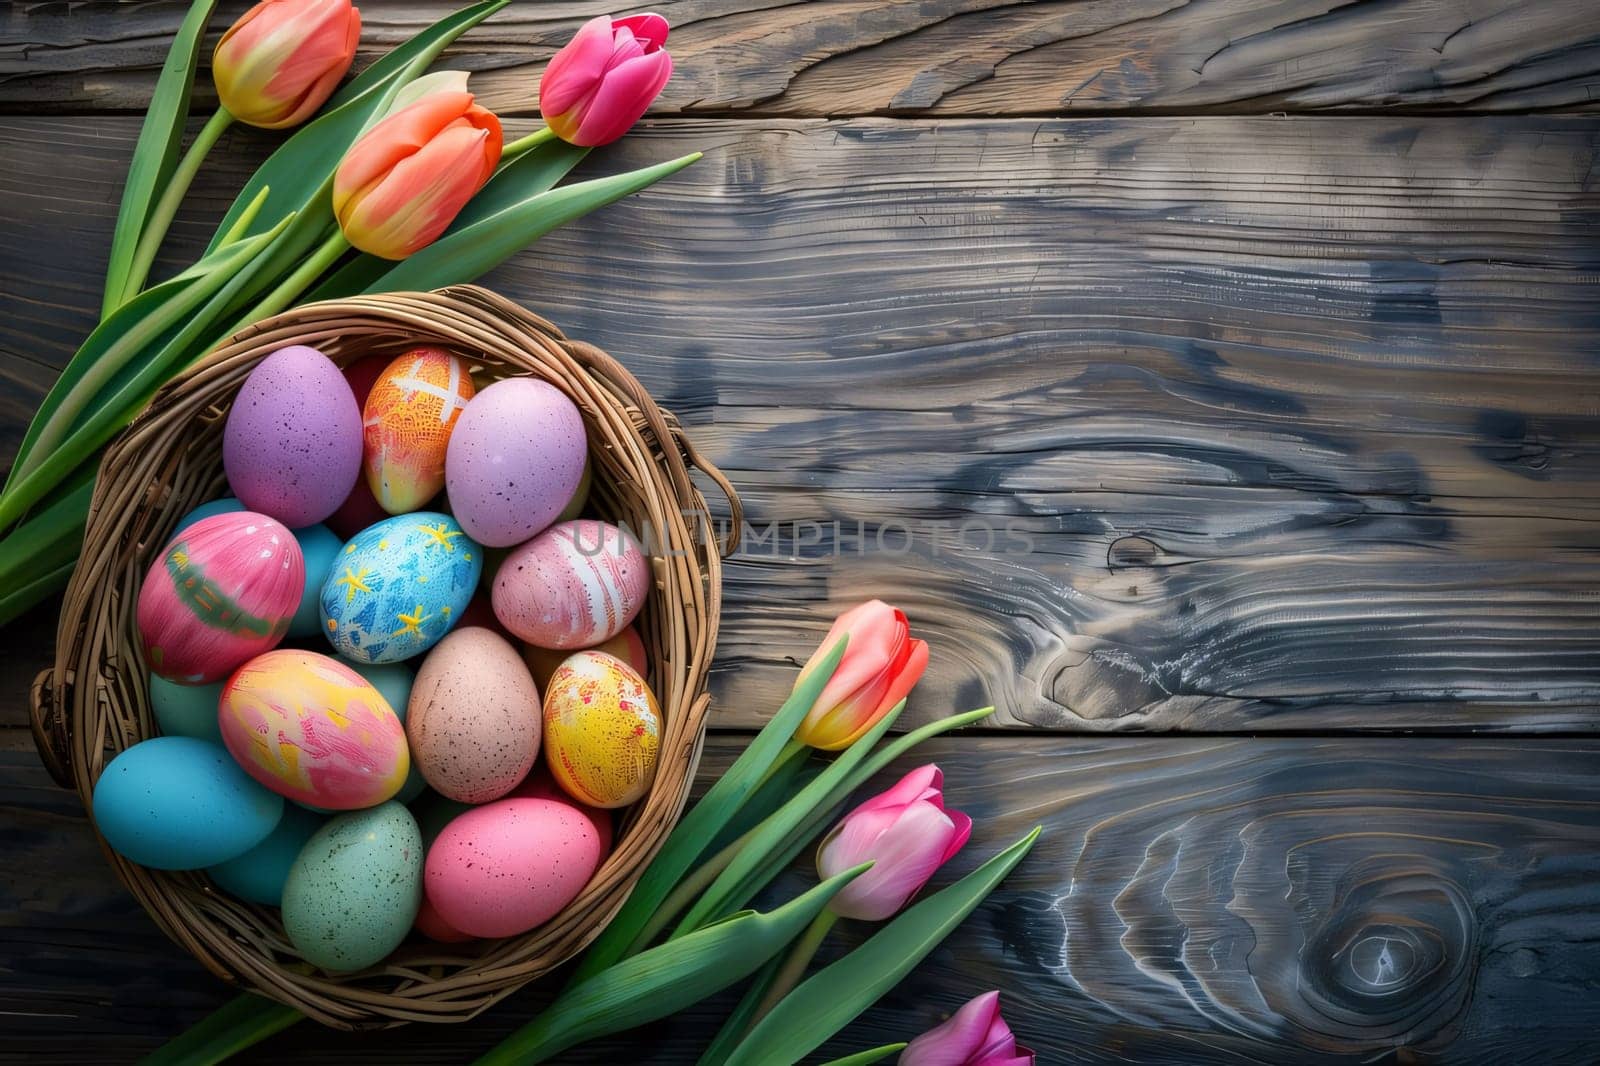 A vibrant display of Easter eggs in a basket with fresh tulips on a rustic wooden background, symbolizing springtime festivity.